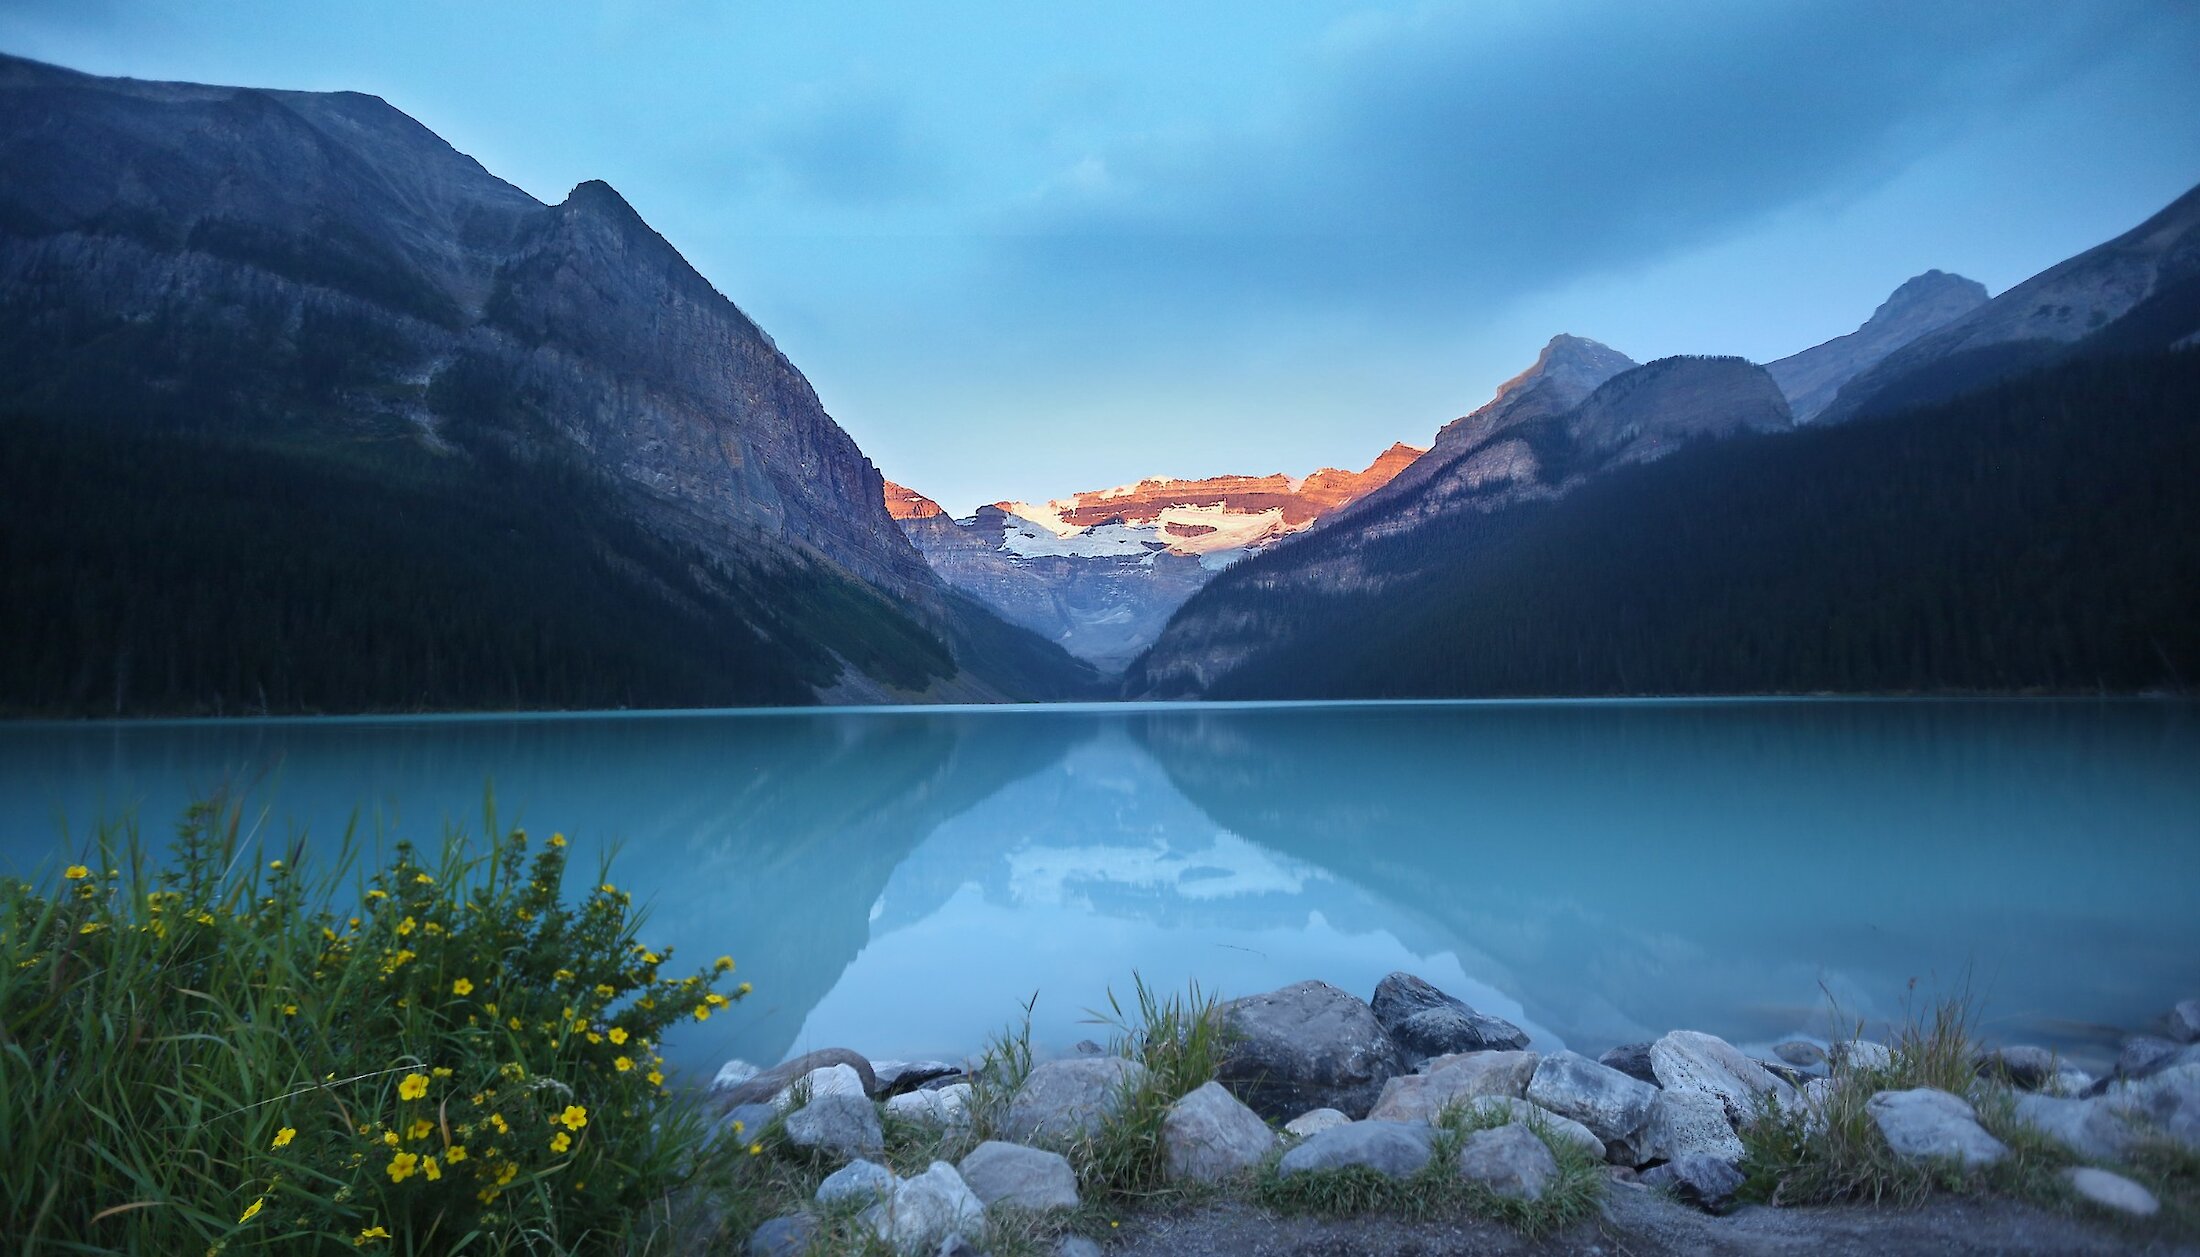 The sunrises over the magnificent Victoria Glacier at Lake Louise in Banff National Park